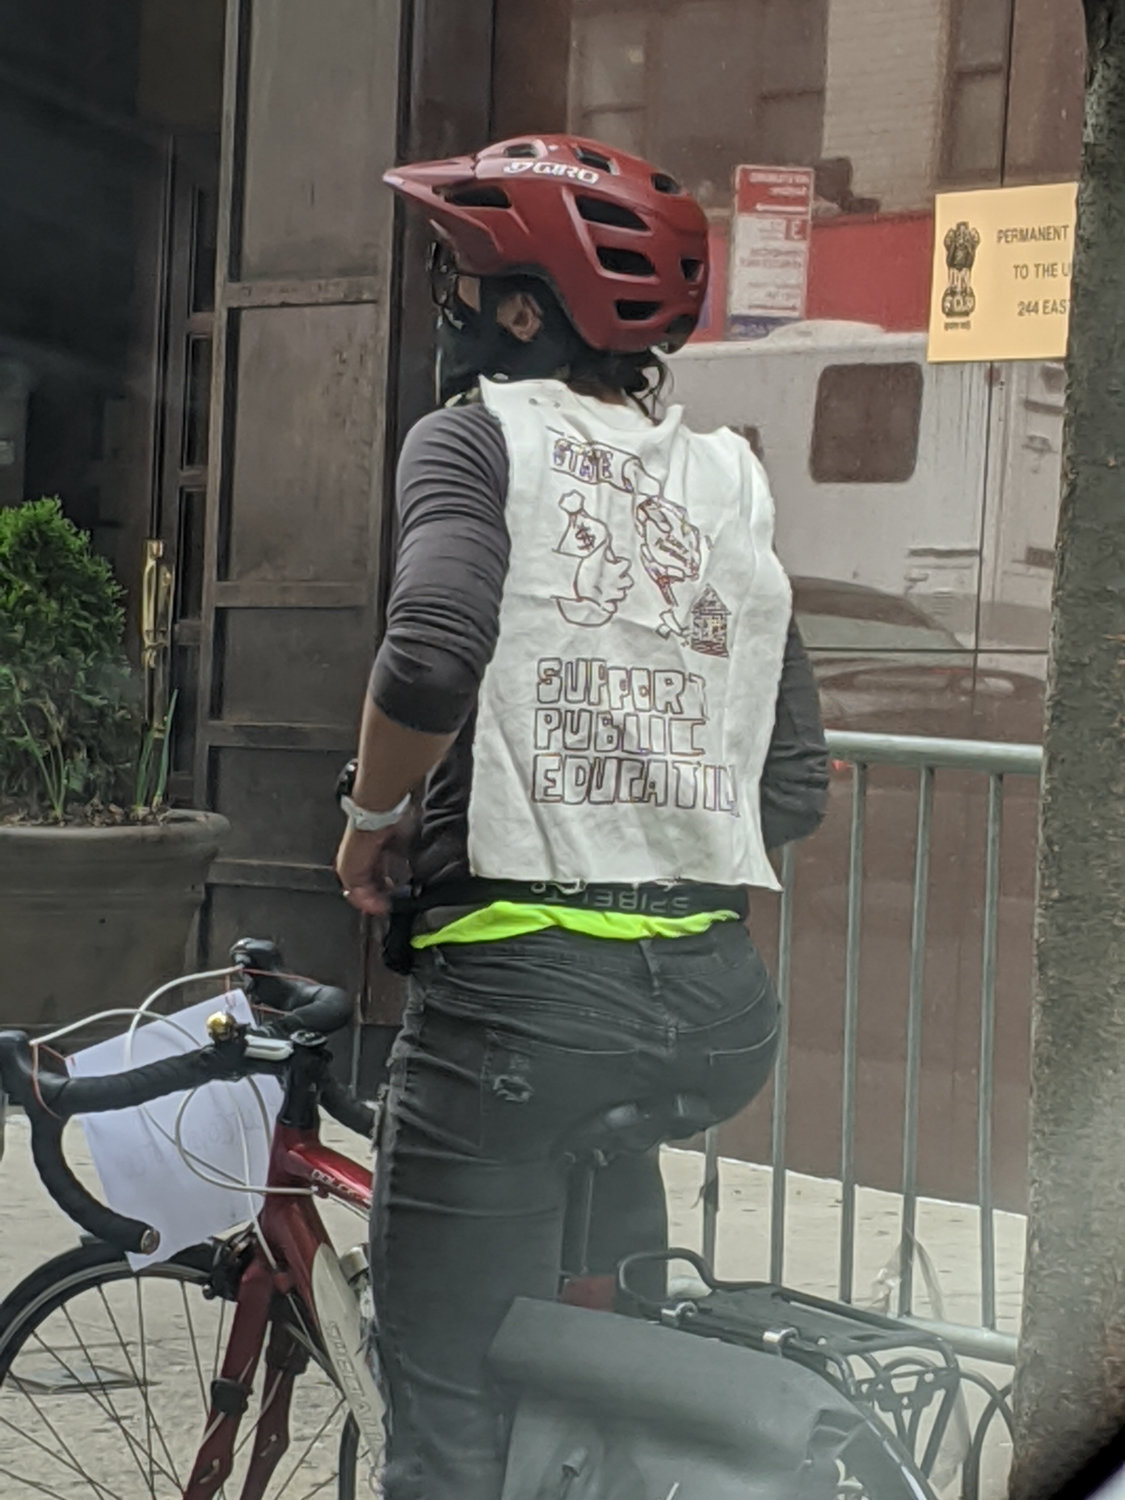 A cyclist wears a sign reading ‘support public education’ during a protest against layoffs at various schools within the CUNY educational system.